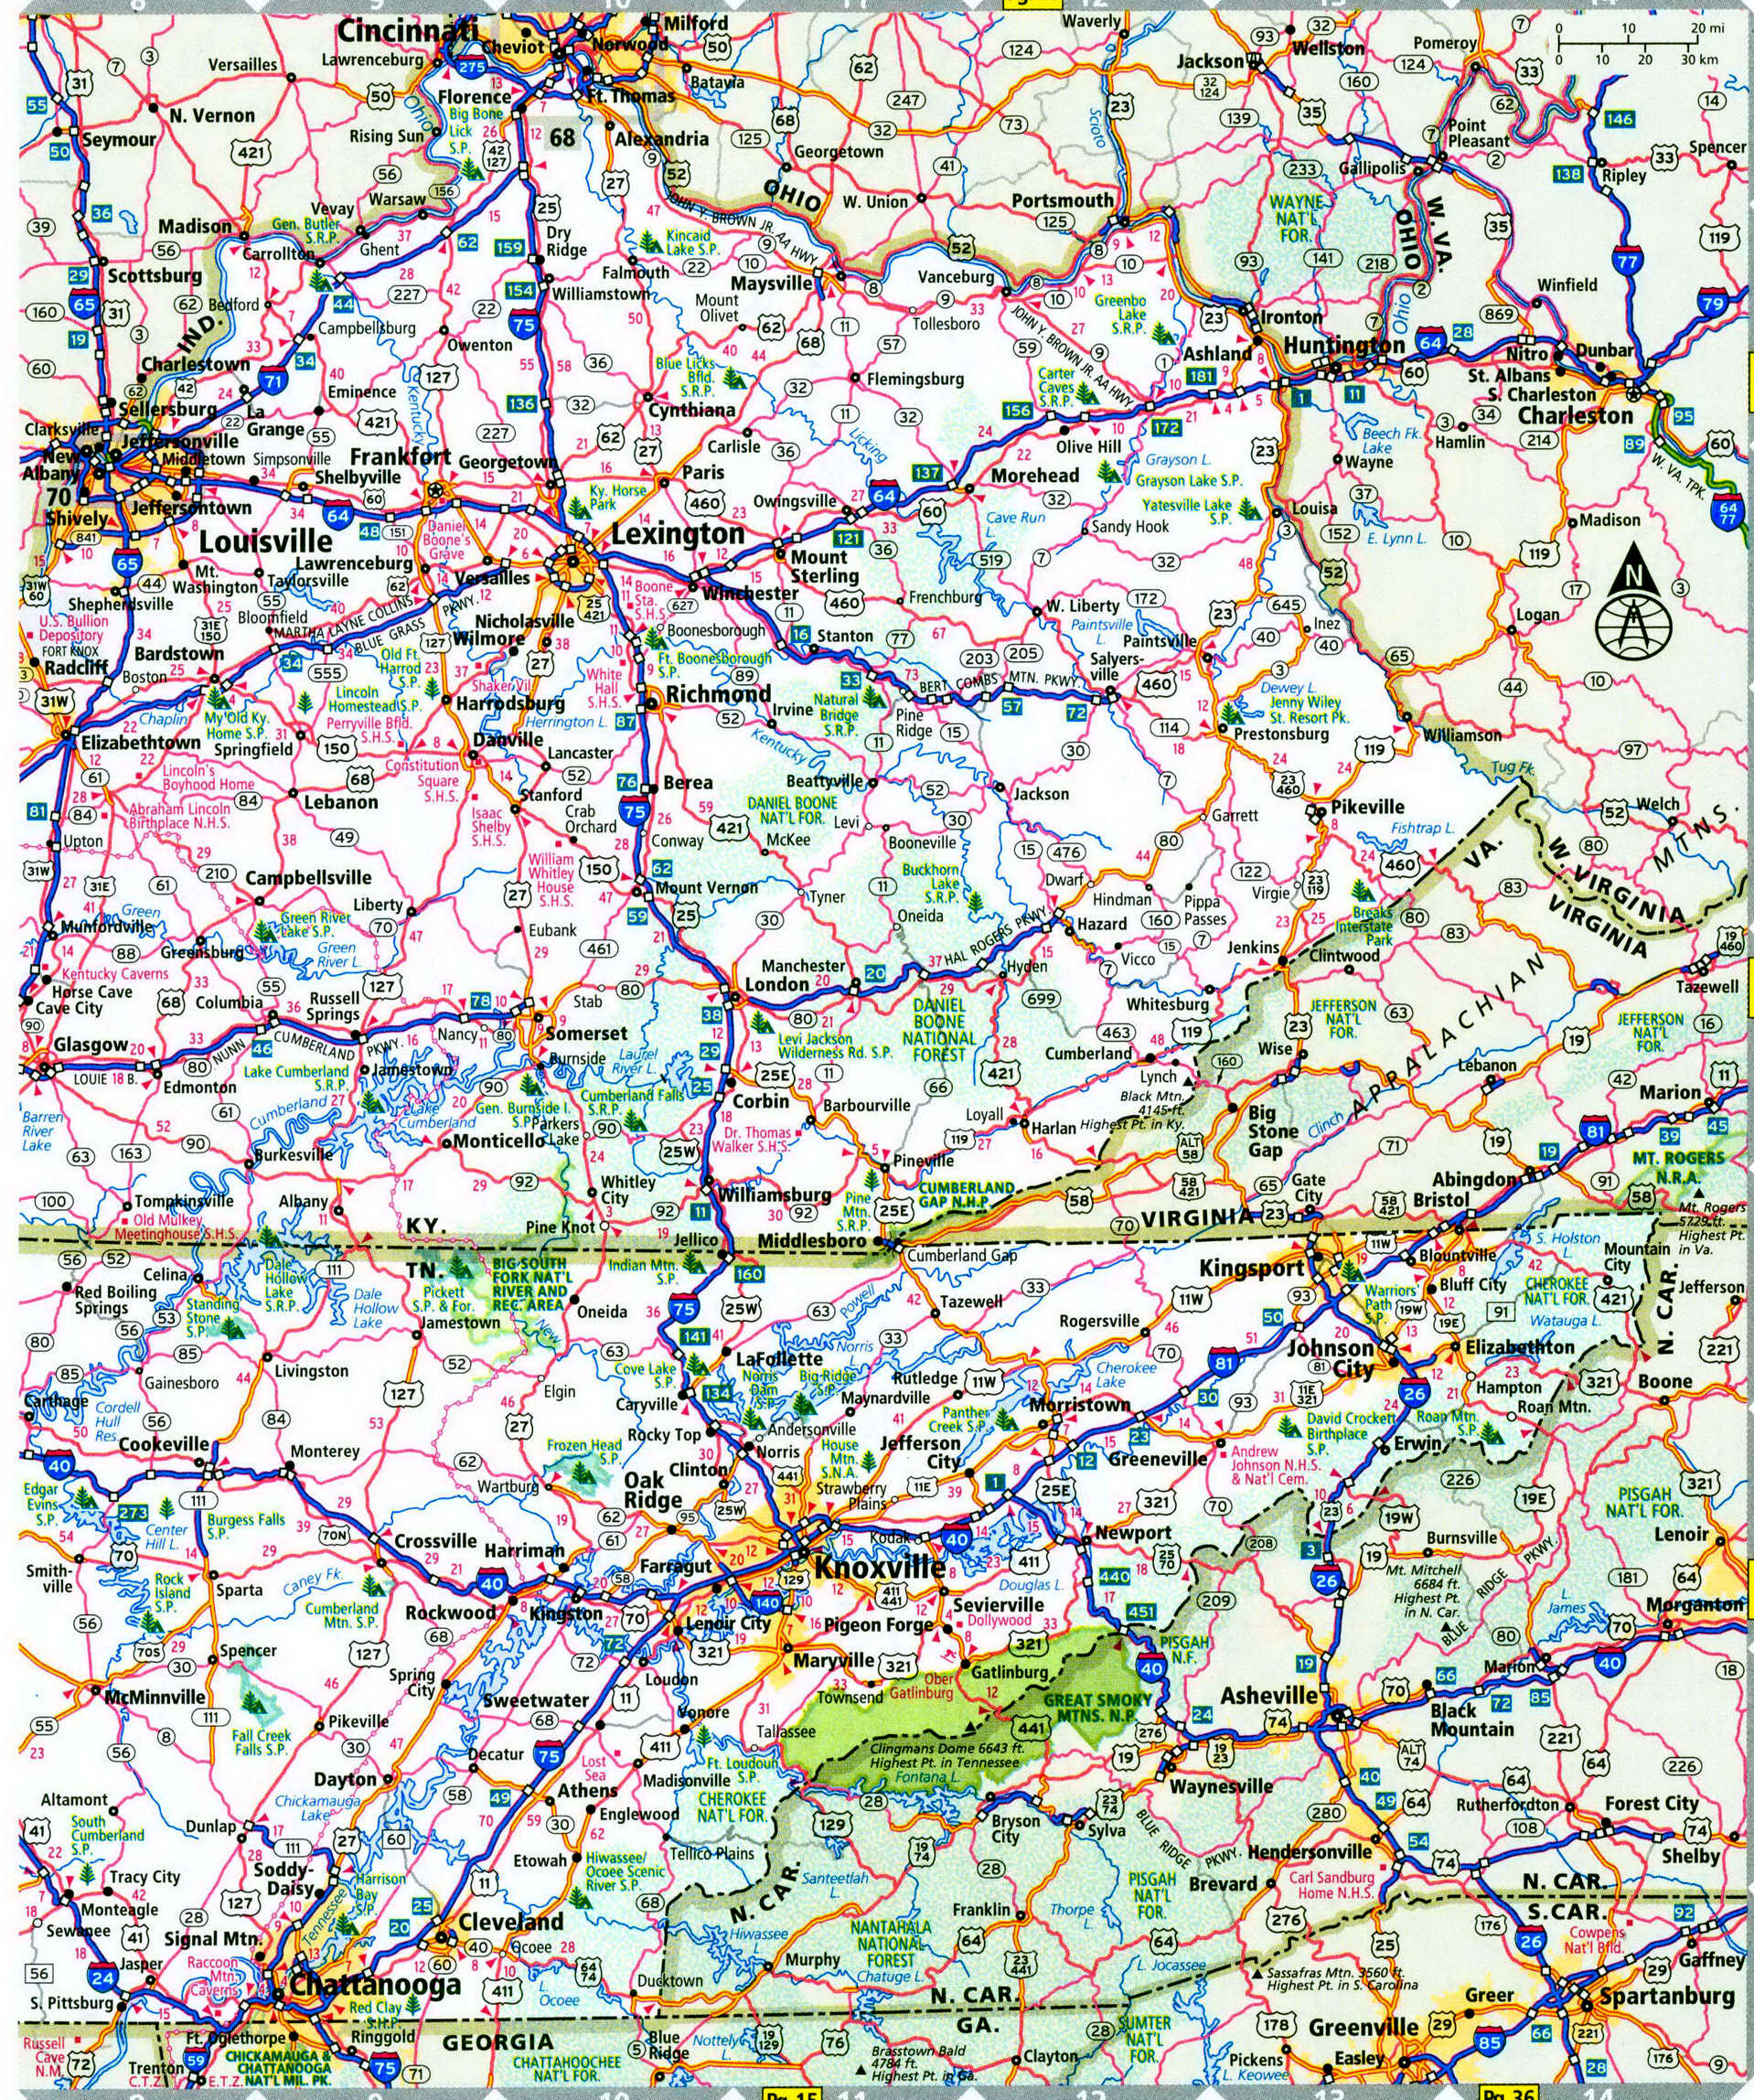 Tennessee and Kentucky interstate highways map free